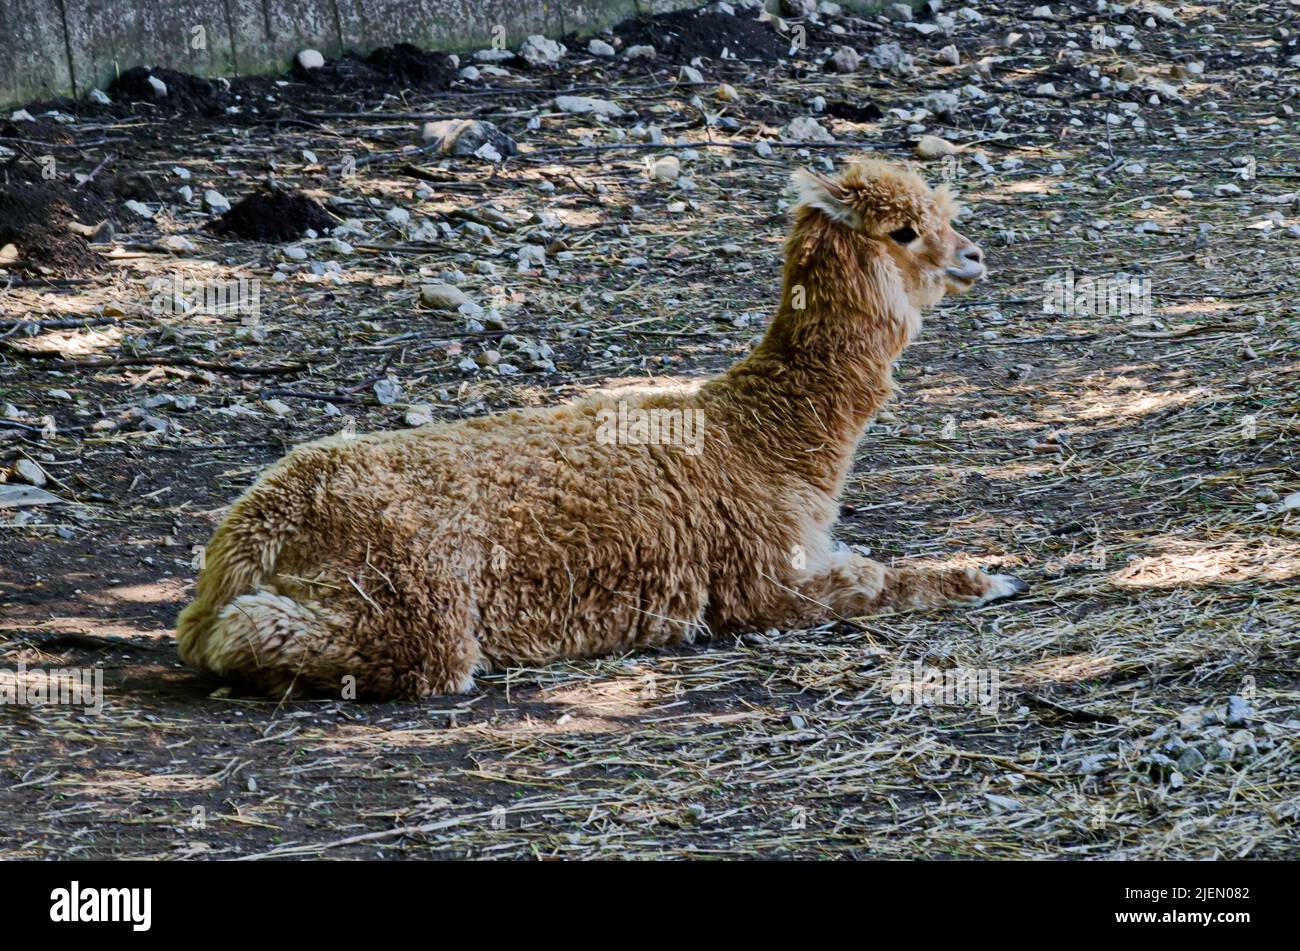 A Alpaca Llama with a pattern of brown and white fur rests in the farmyard, Sofia, Bulgaria Stock Photo